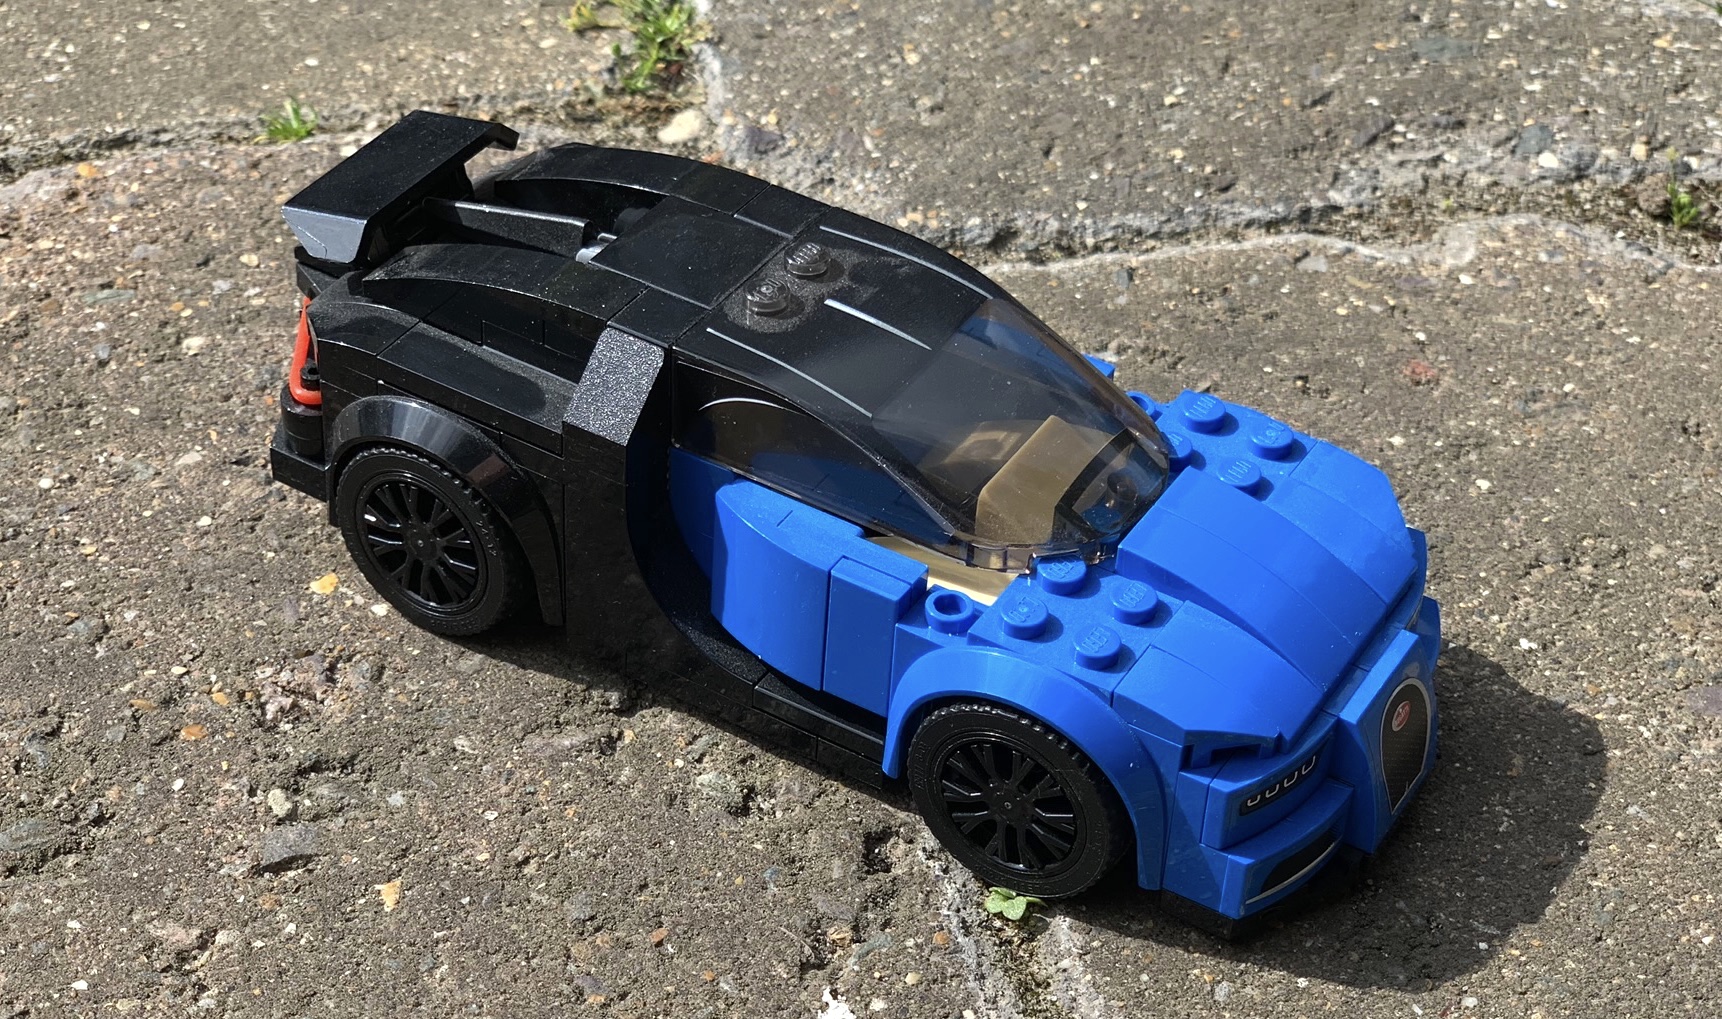 The usual LEGO rim designs could do with an improvement for such a significant model.